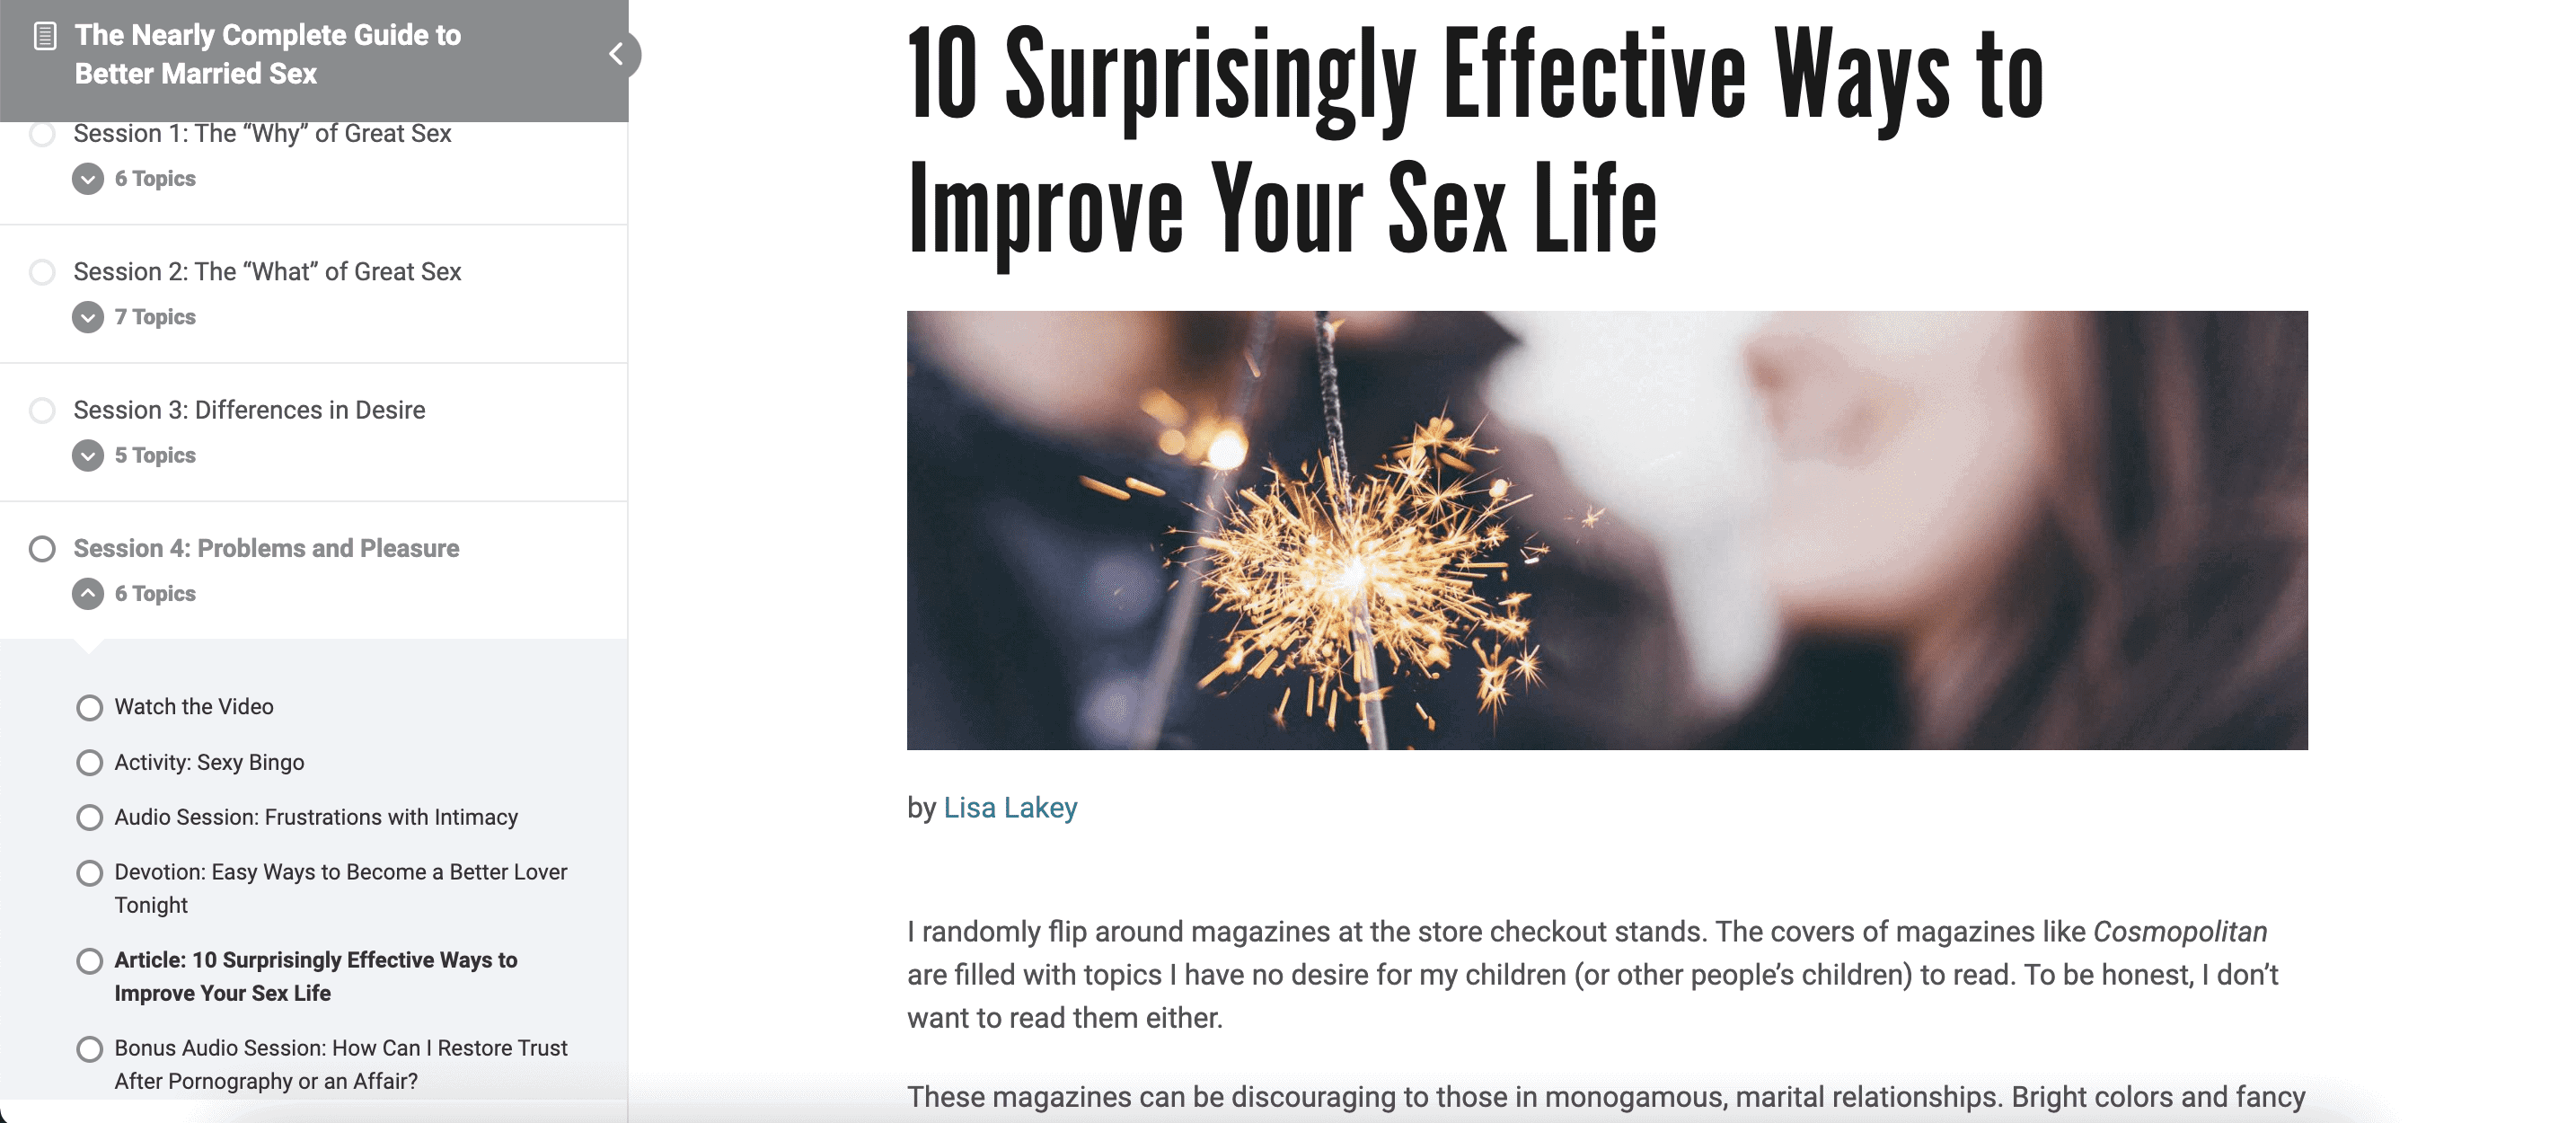 The Nearly Complete Guide to Better Married Sex Online Course photo